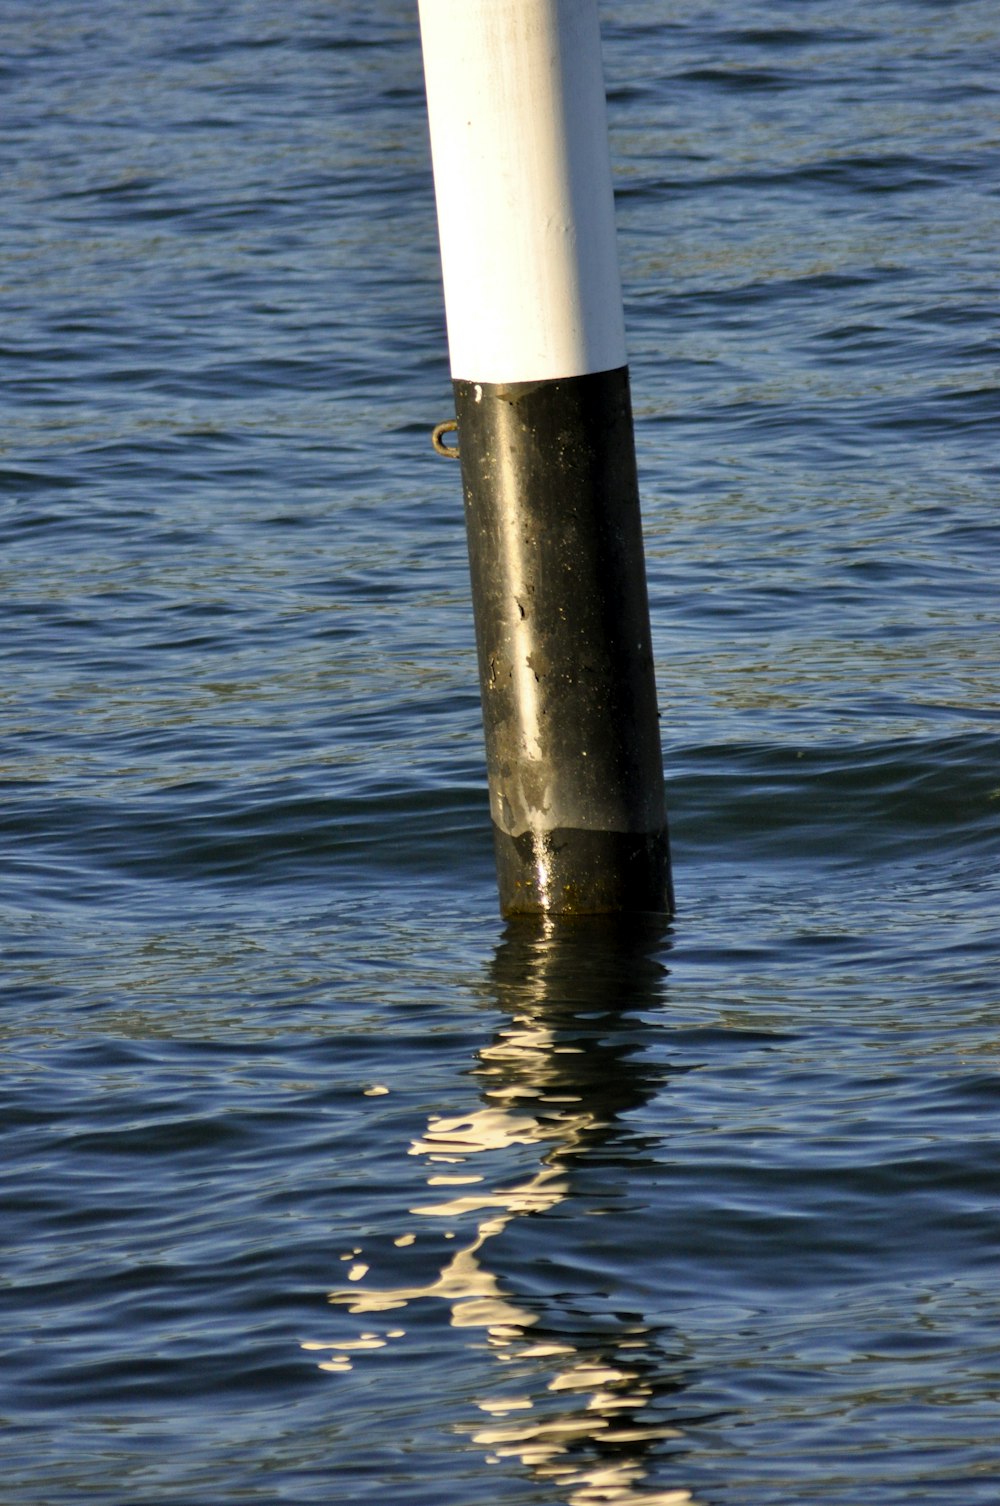 black and white metal rod on sea during daytime